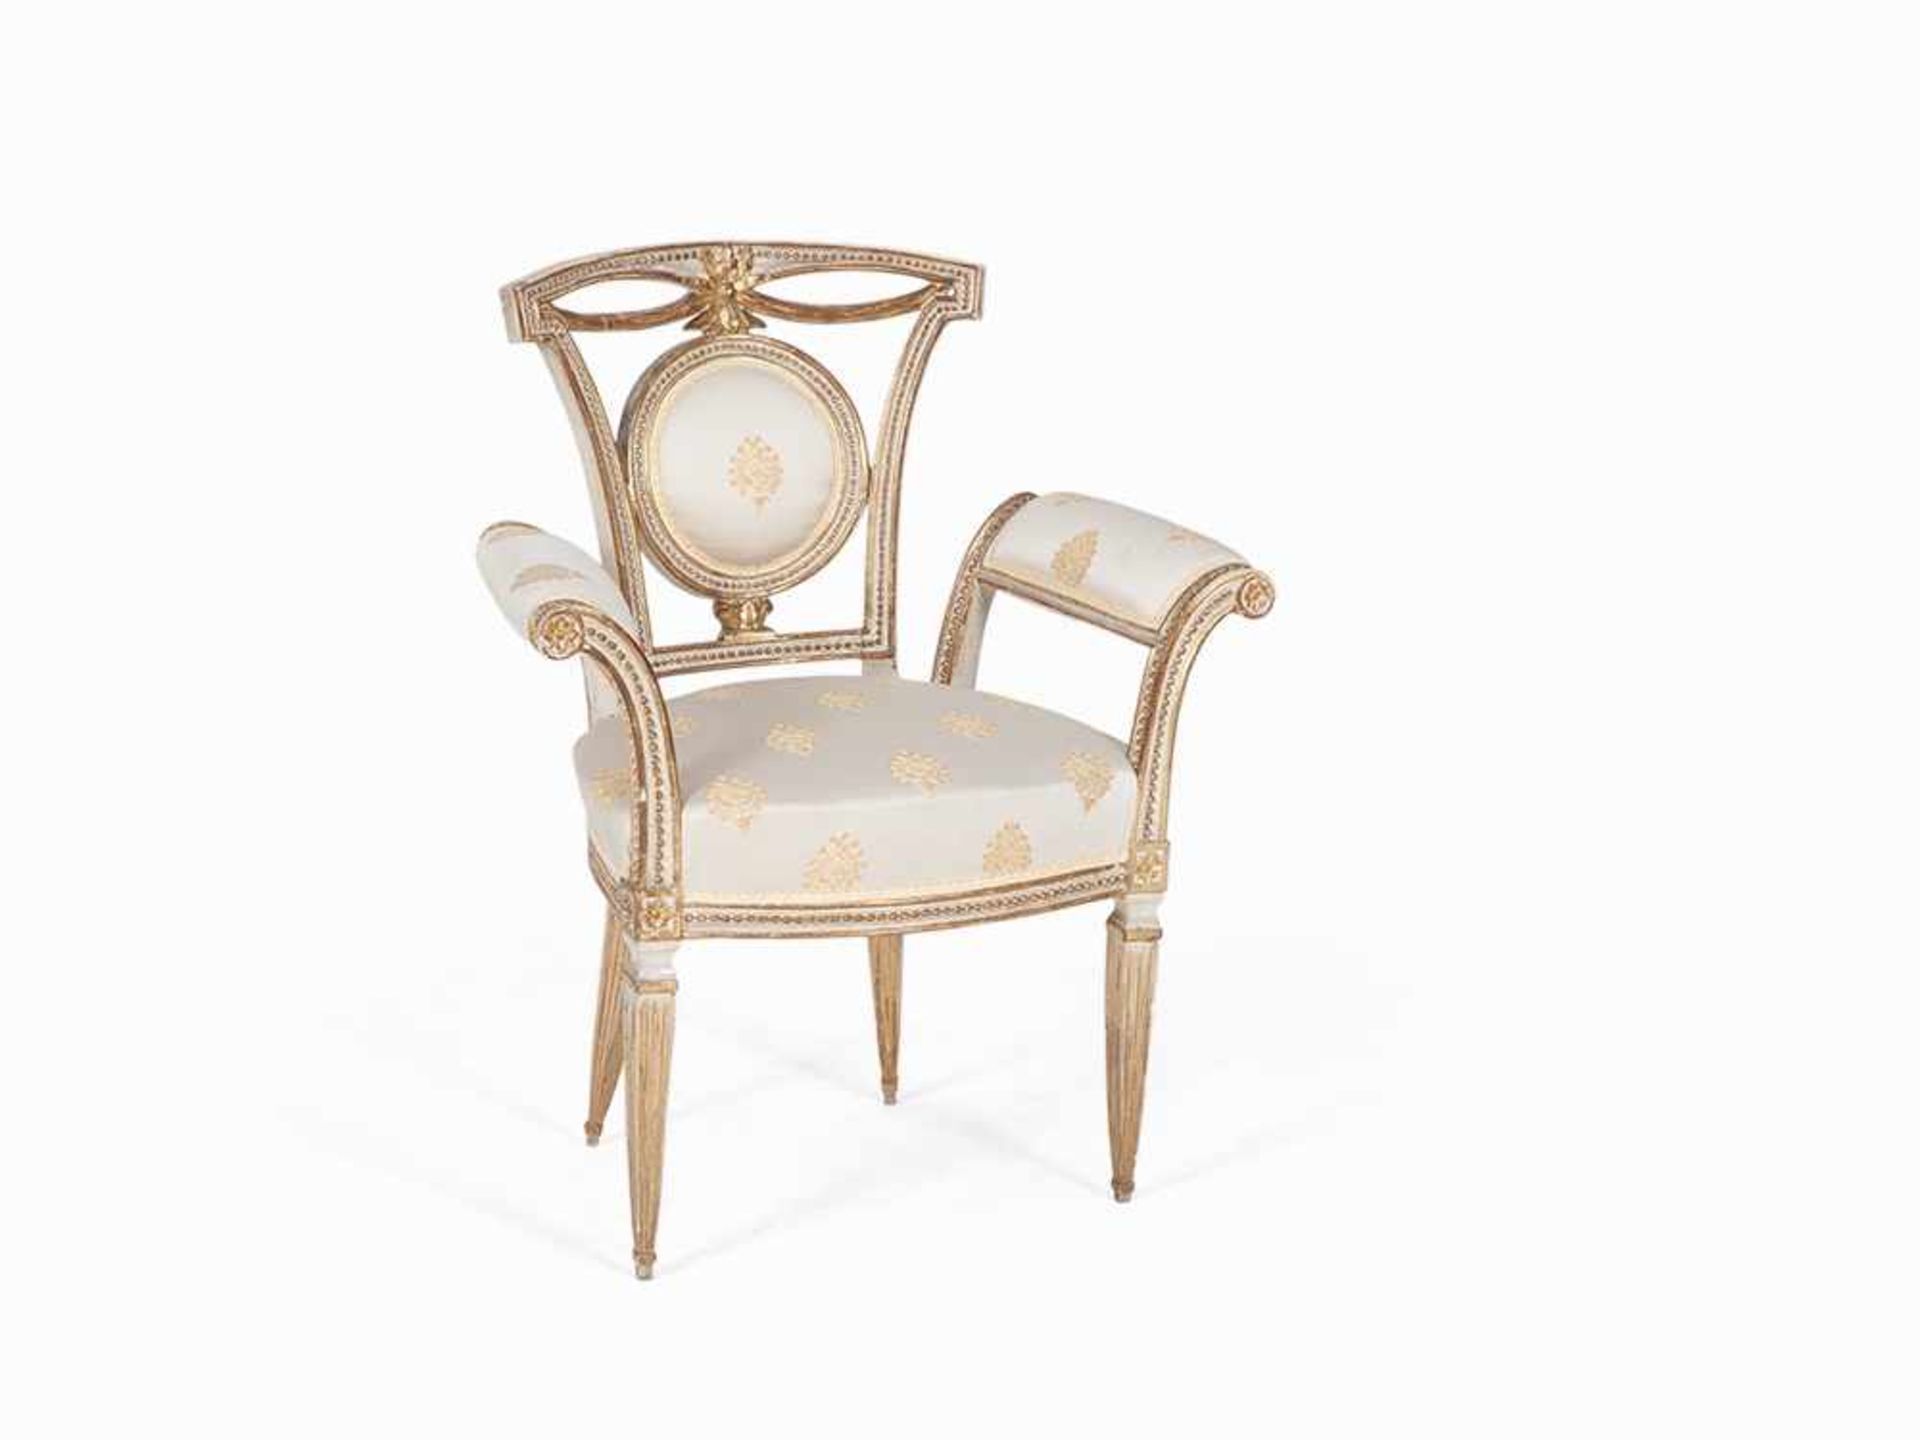 Pair of Armchairs, Lucca, around 1790 Solid wood, carved, white painted and partial gold-plated, - Image 2 of 10